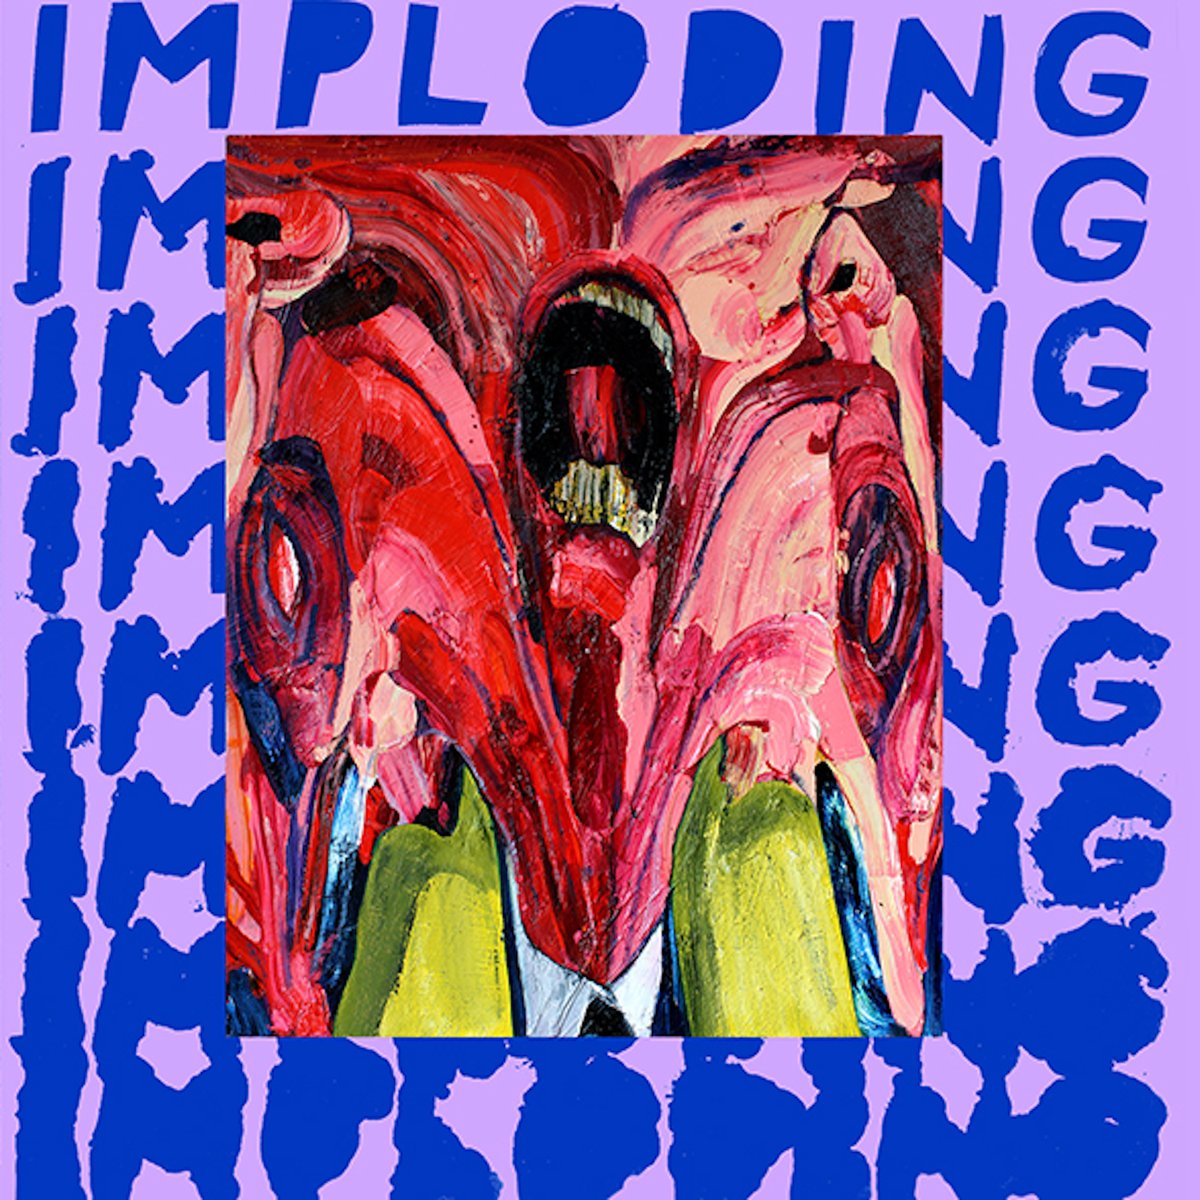 It's exactly four weeks until release day for Imploding!